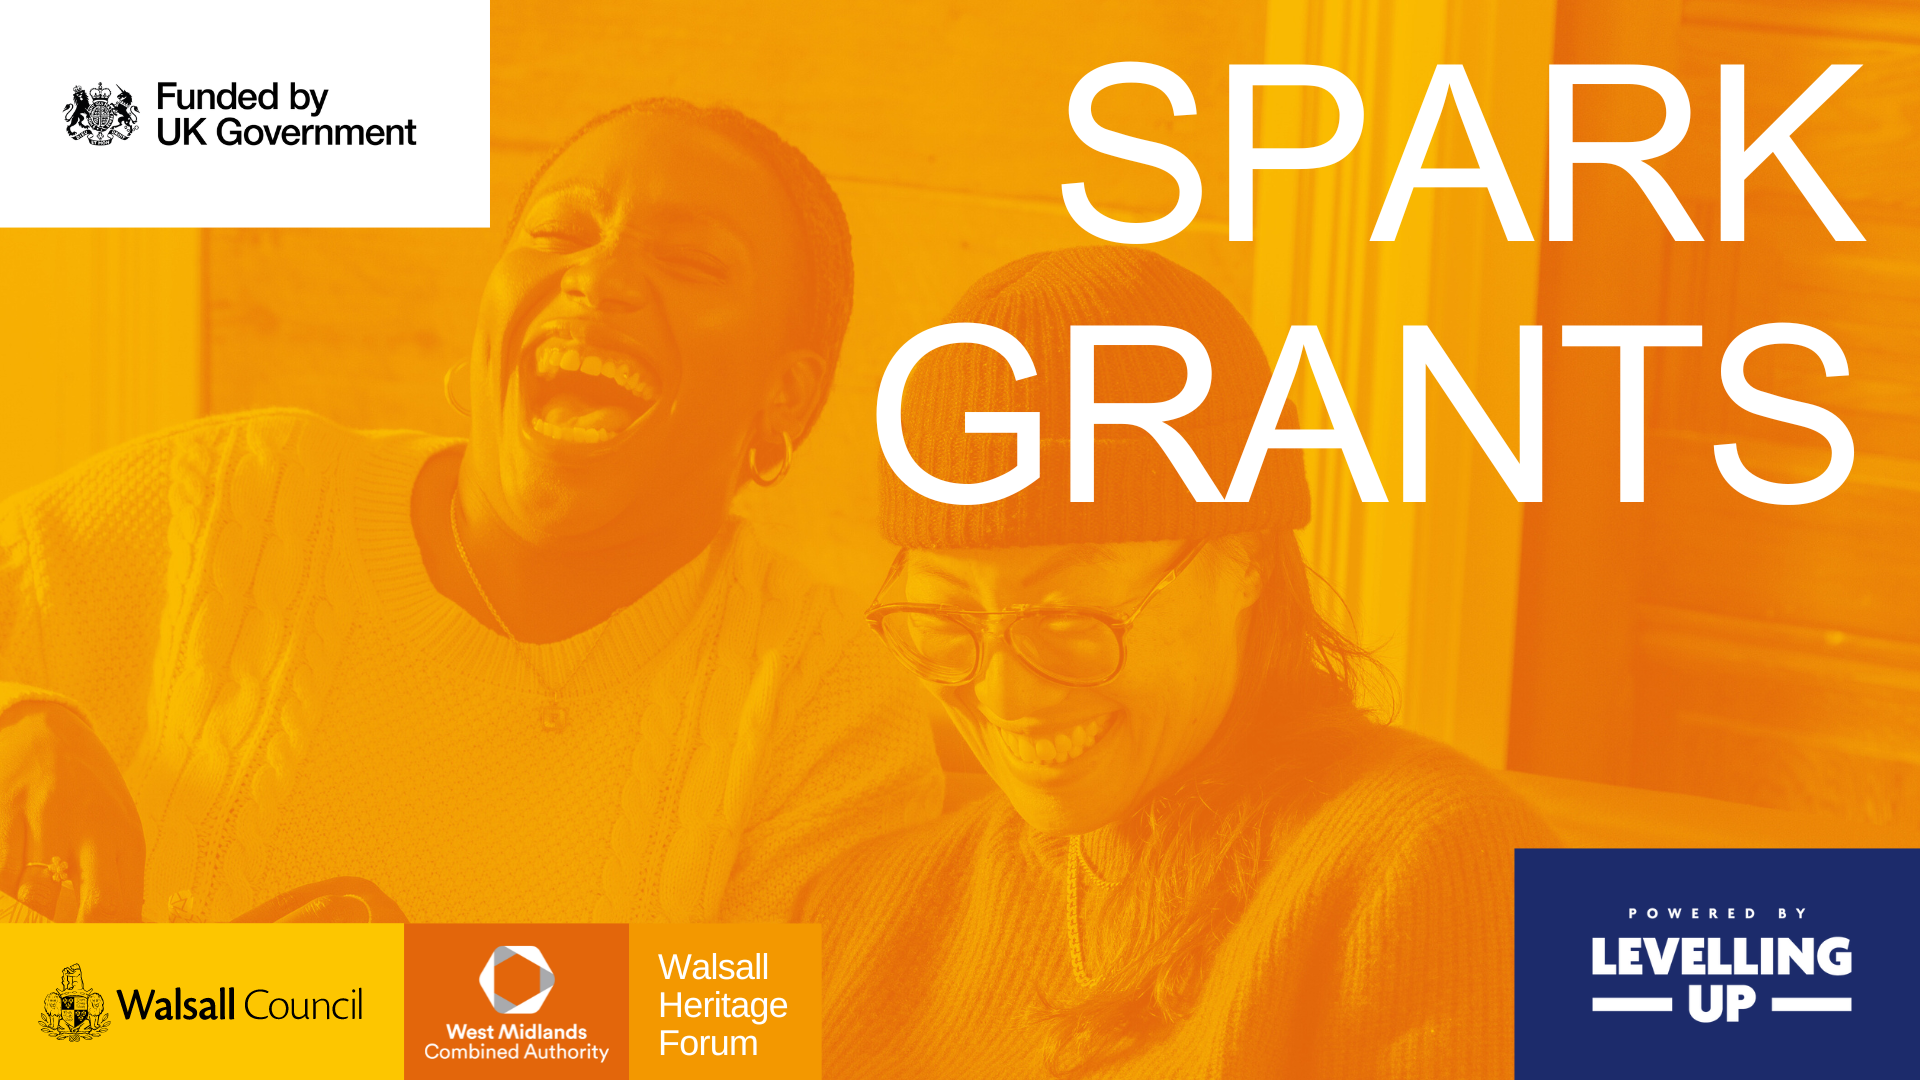 An image of two community members laughing with the words Spark Grants overlaid.